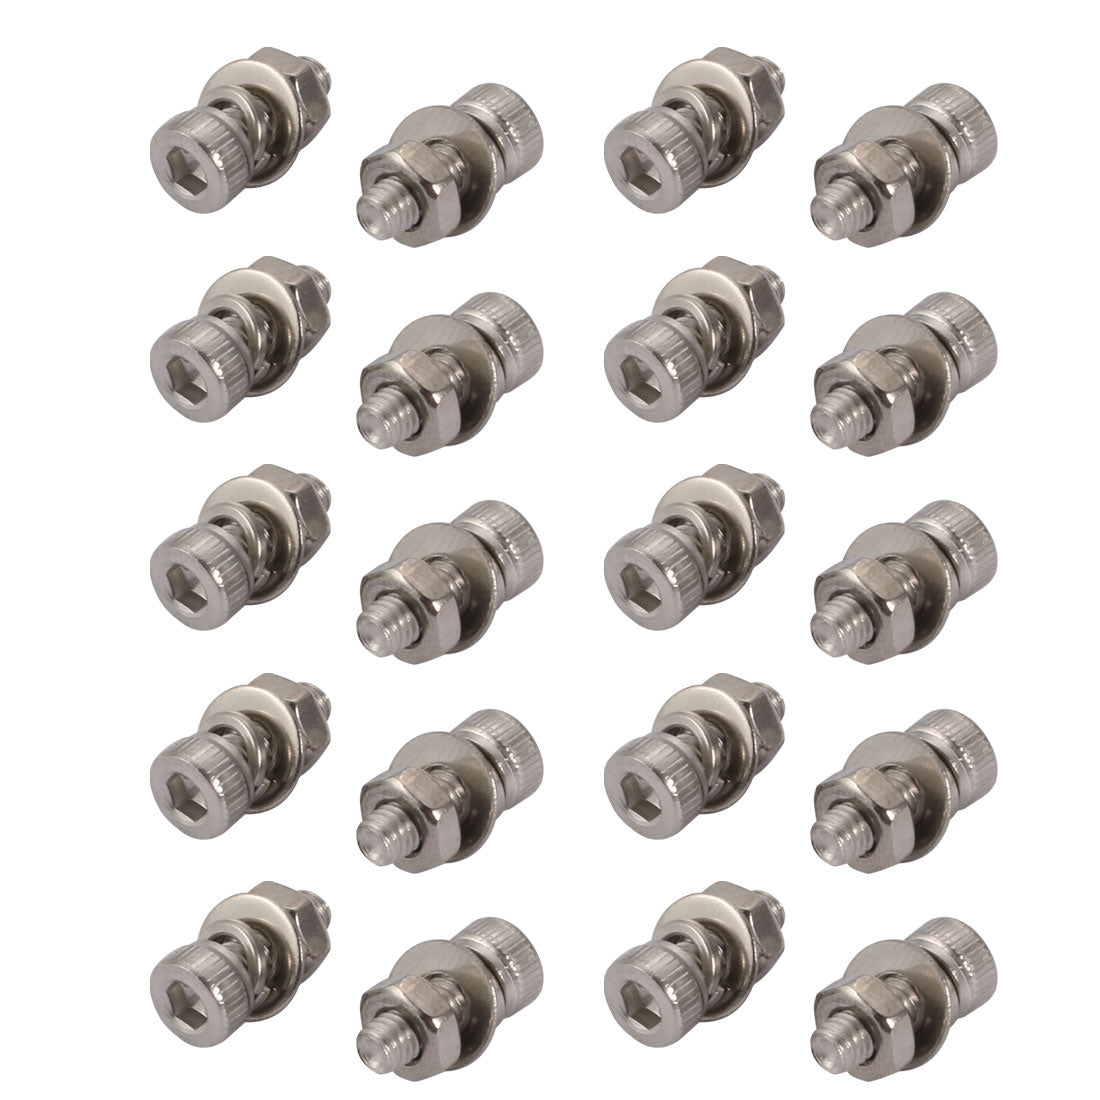 uxcell Uxcell 20pcs M3x8mm 304 Stainless Steel Knurled Hex Socket Head Bolts Nuts w Washers